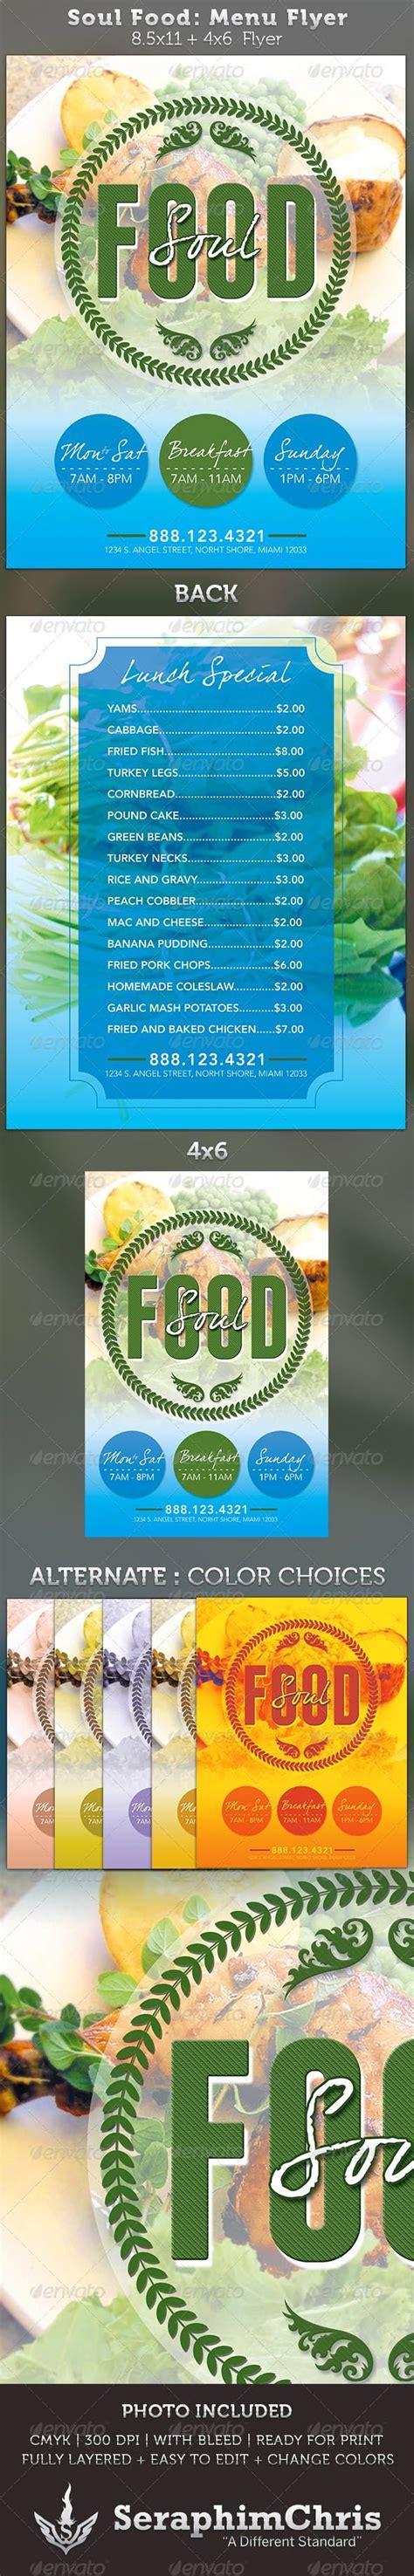 India has some of the most exquisite food in the world, even if some would like to argue against the hygiene of the food environment in this wonderful country. Soul Food Menu Flyer Template | Soul food menu, Menu flyer ...